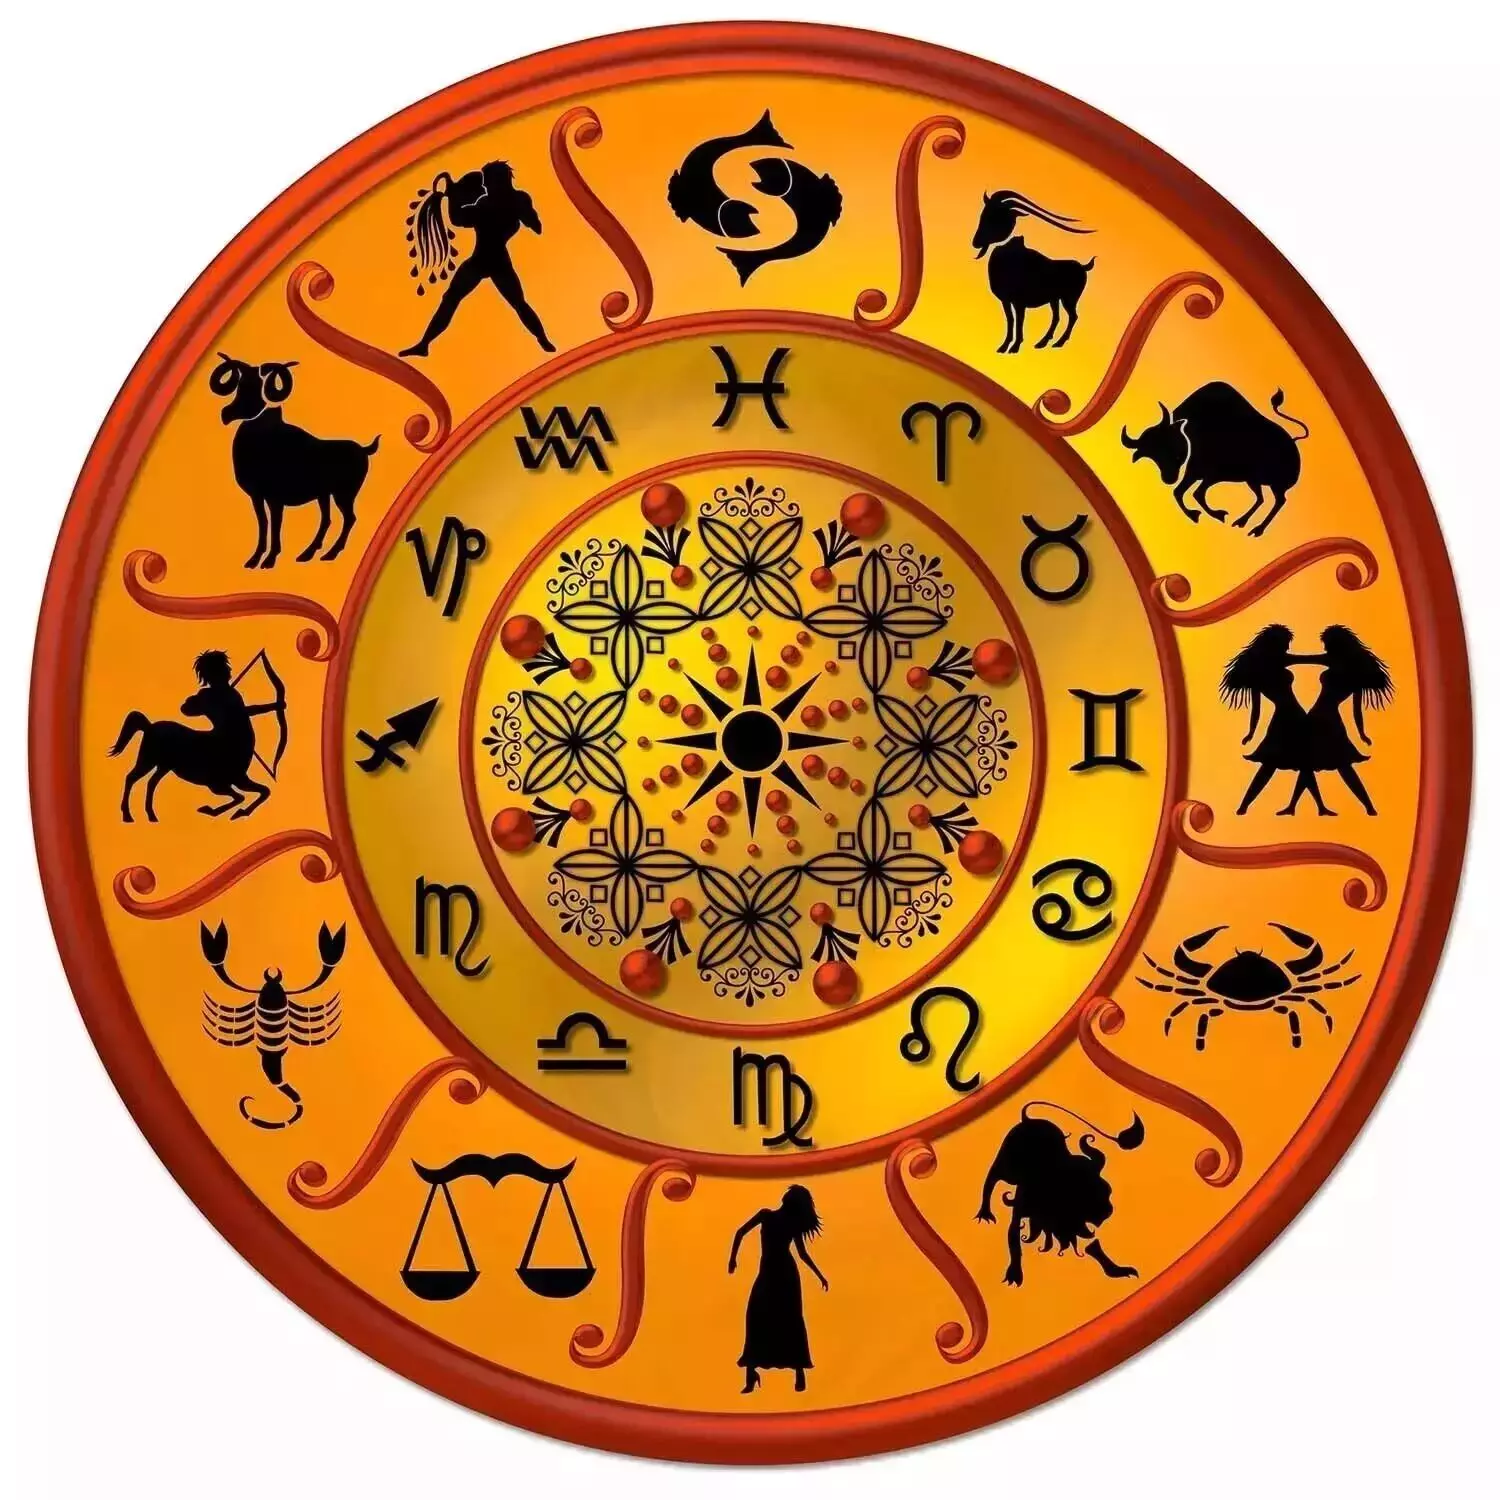 01 December  – Know your todays horoscope